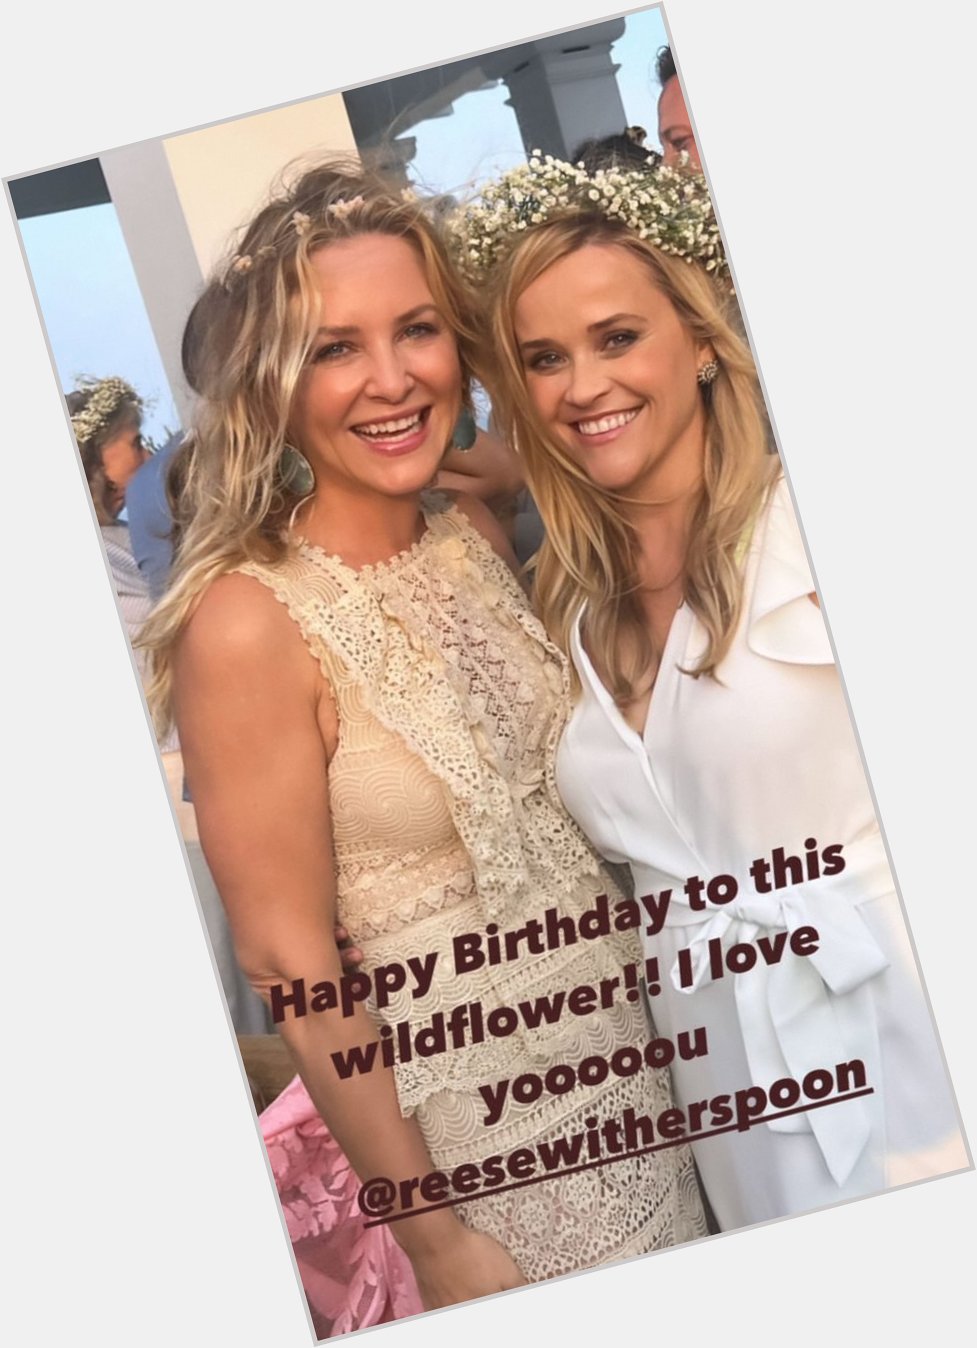 Happy birthday, reese witherspoon <3 